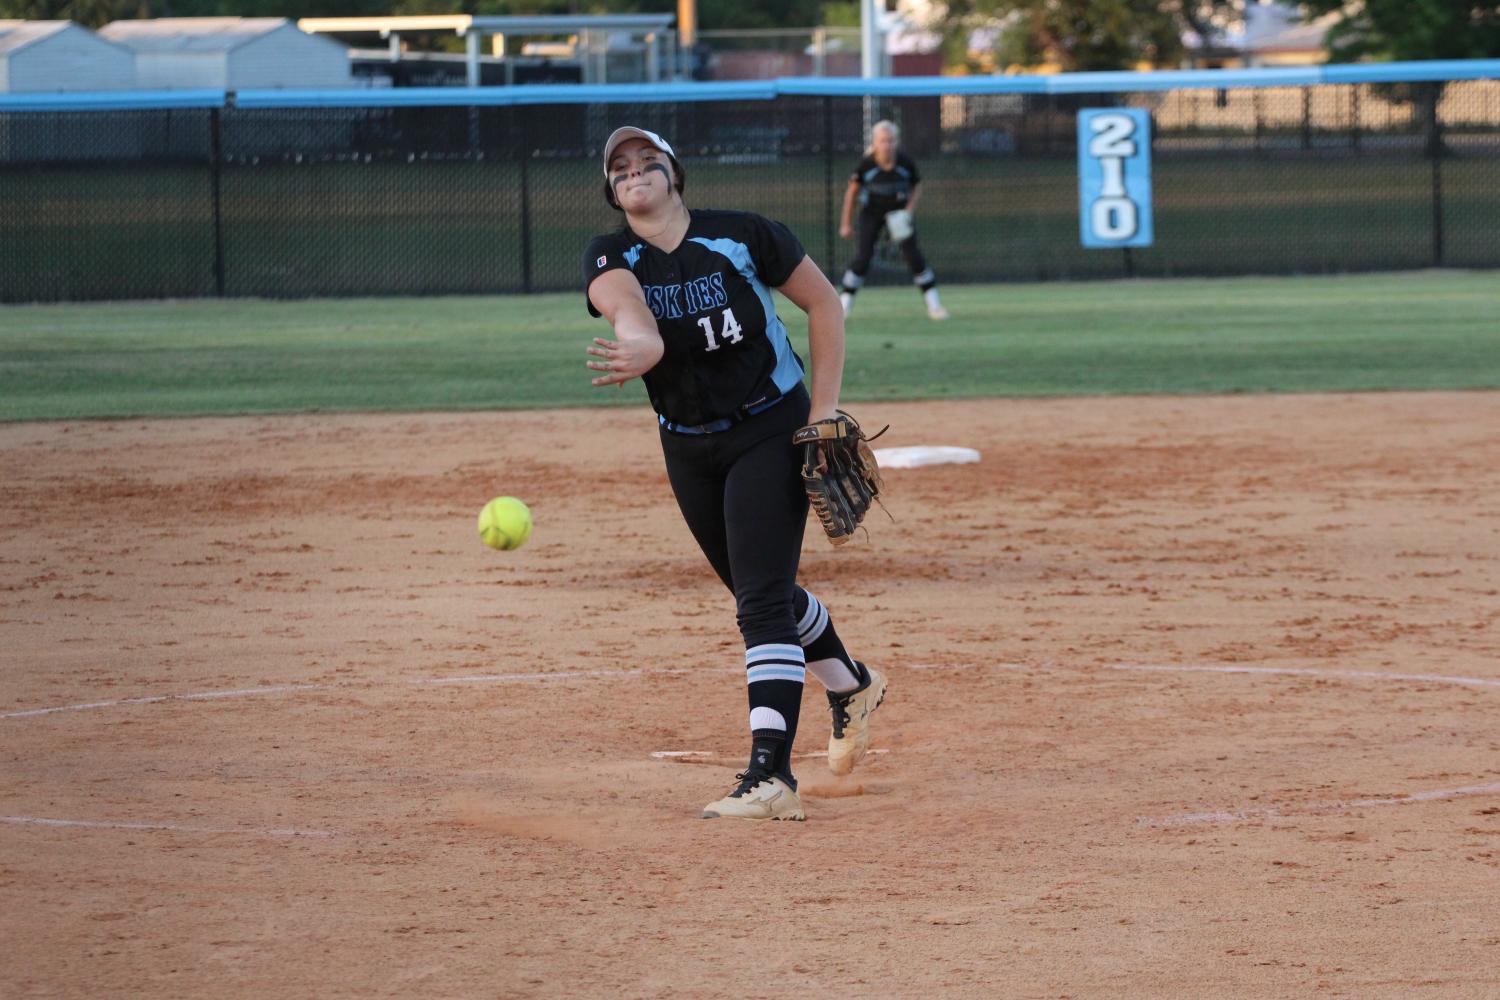 Pitcher Ashley Worrell pitches against East River. The team won 7-2.